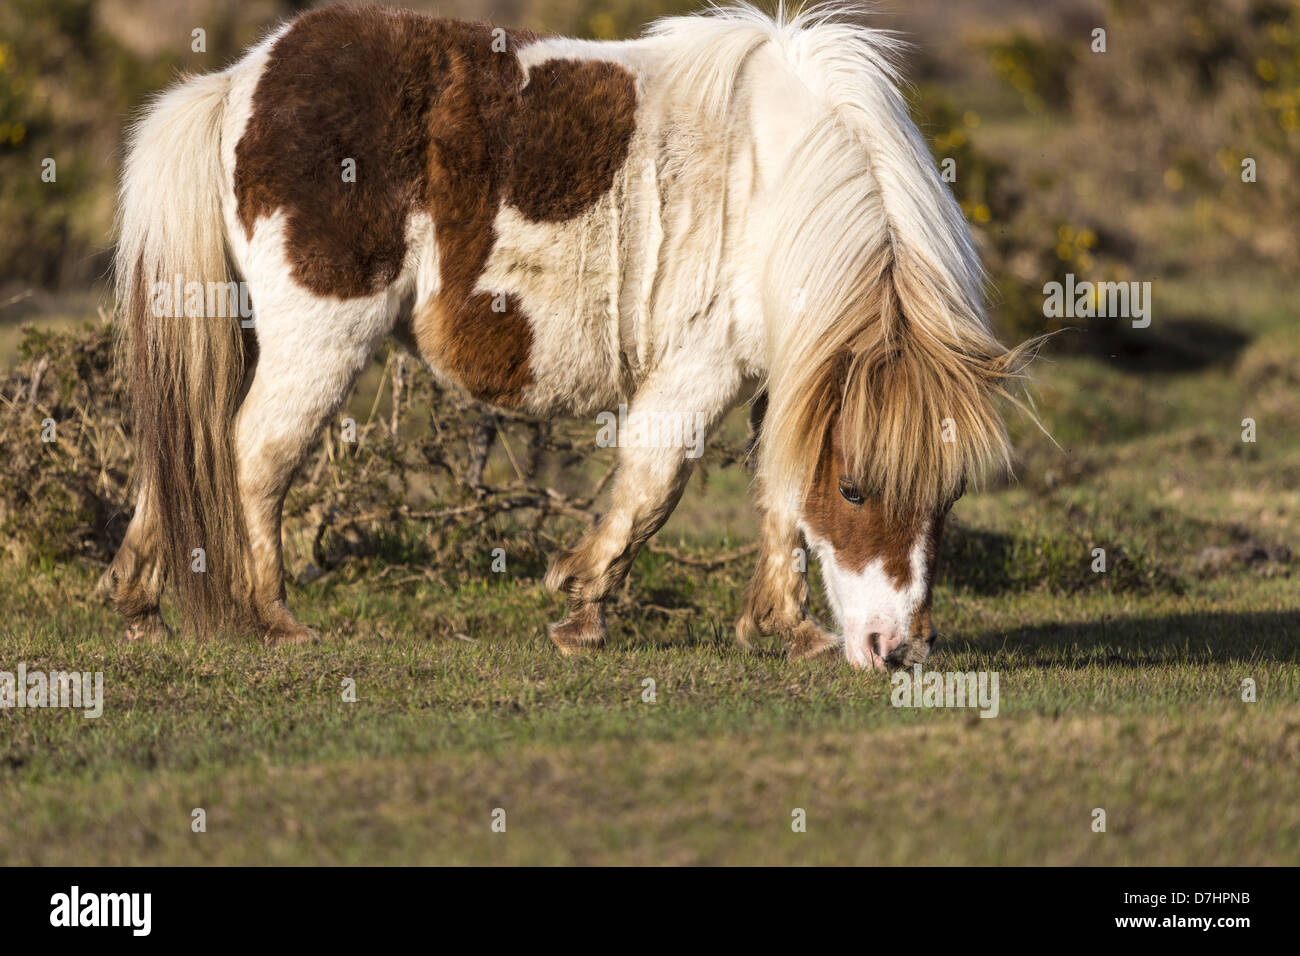 New Forest native breed brown and white skewbald pony grazing in warm evening light Stock Photo